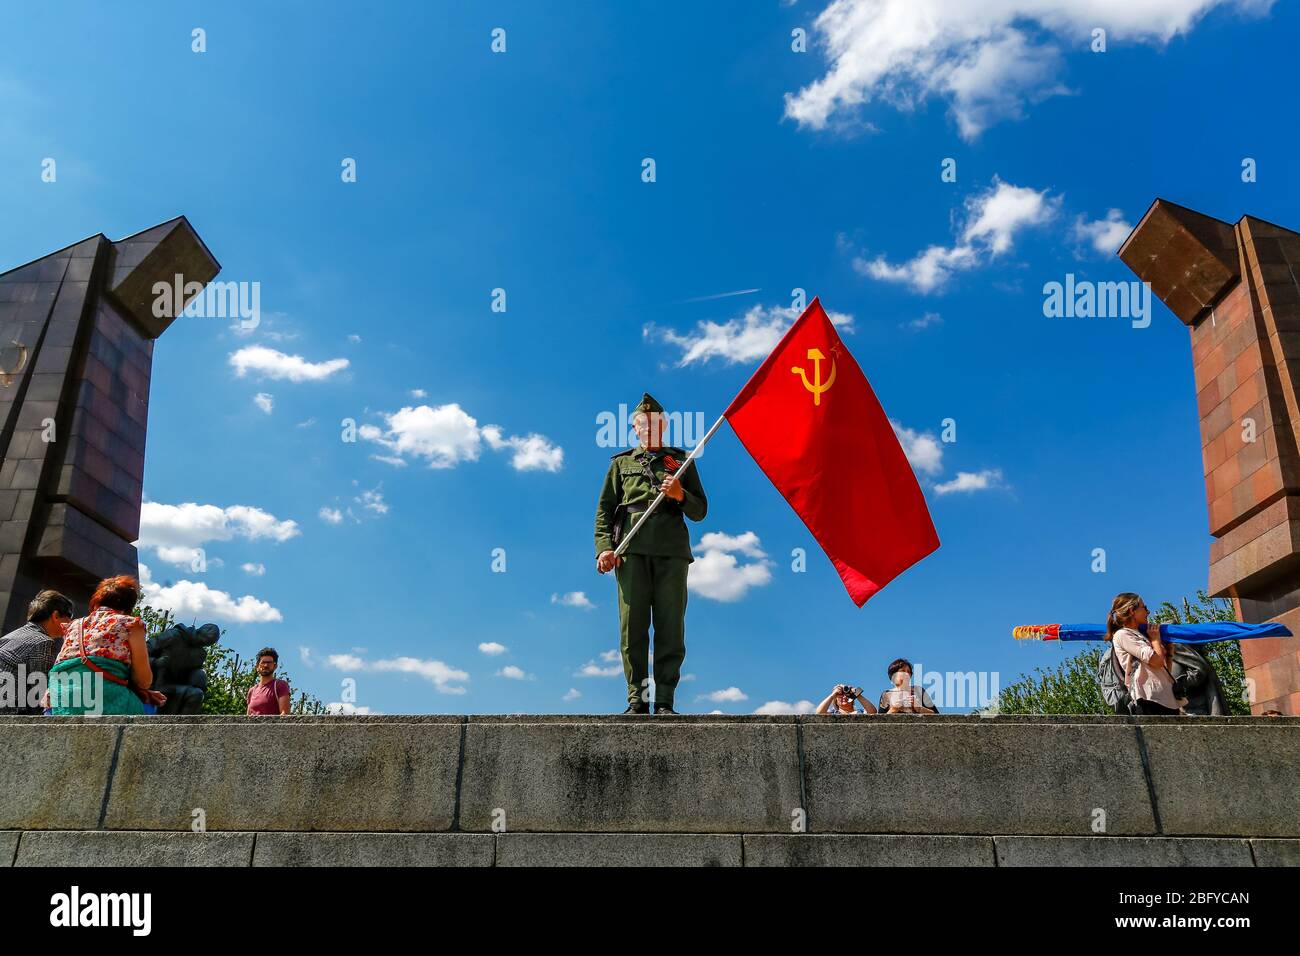 May 9, 2016, Berlin, at the Soviet War Memorial in Treptower Park (Treptower War Memorial), a memorial and at the same time a military cemetery, numerous Russians and German-Russians with many colorful flags commemorate the 71st day of victory at the end of the Second World War. The memorial was erected in Germany in 1949 on the instructions of the Soviet military administration to honor the soldiers of the Red Army who died in World War II. Over 7000 of the soldiers who died in the Schlaughs around Berlin are buried here. An older man in historical uniform poses with the Soviet flag. | usage Stock Photo